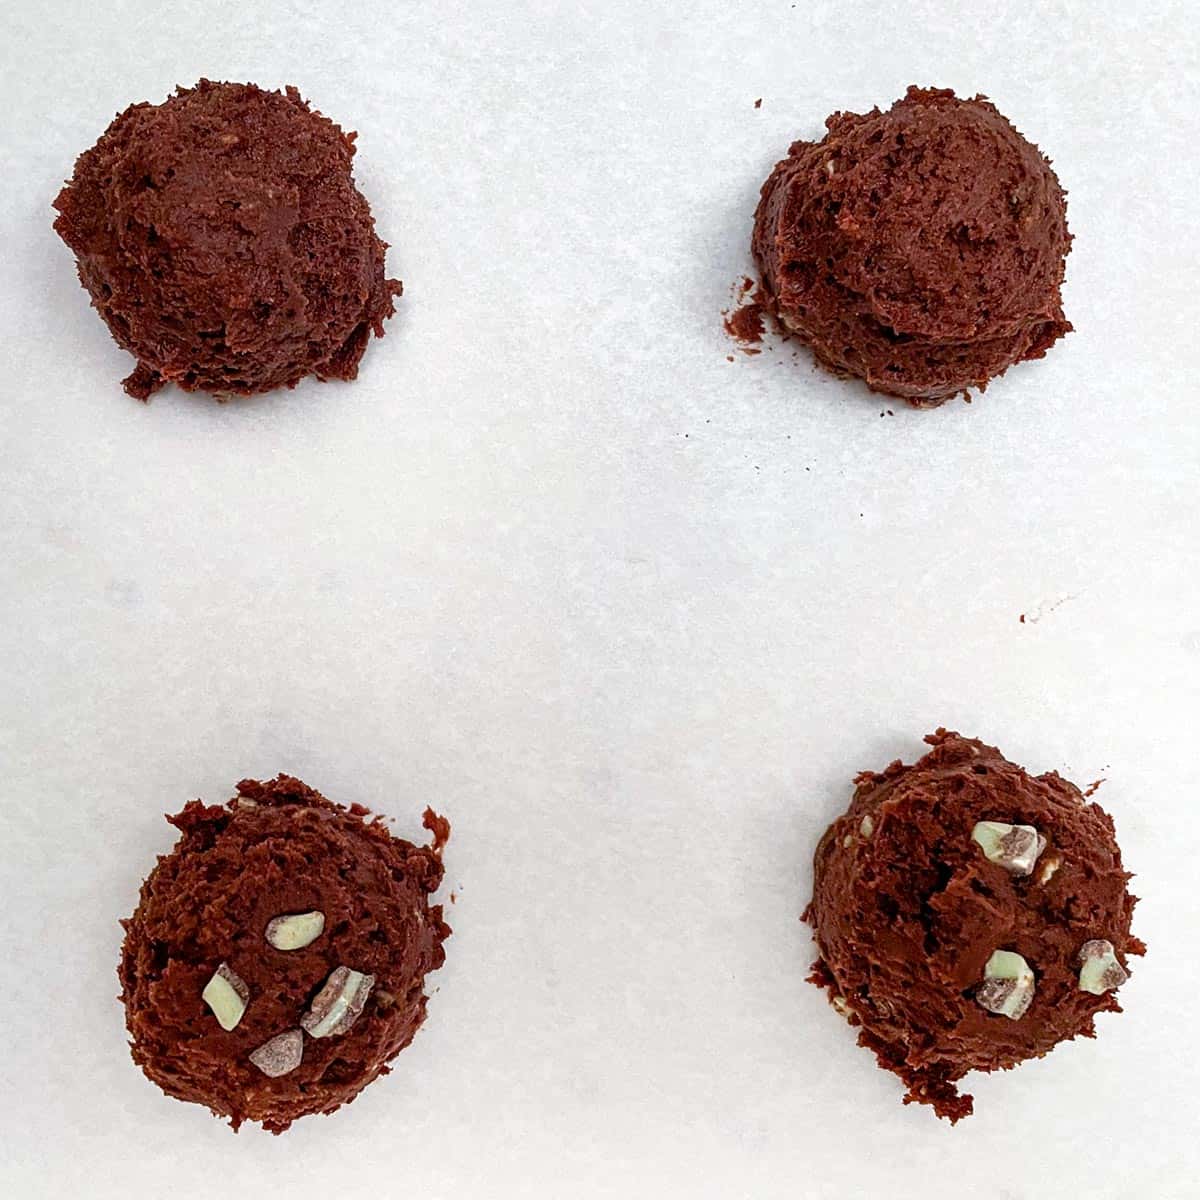 Four mounds of cookie dough where two of them have added mint chips to the tops before baking.